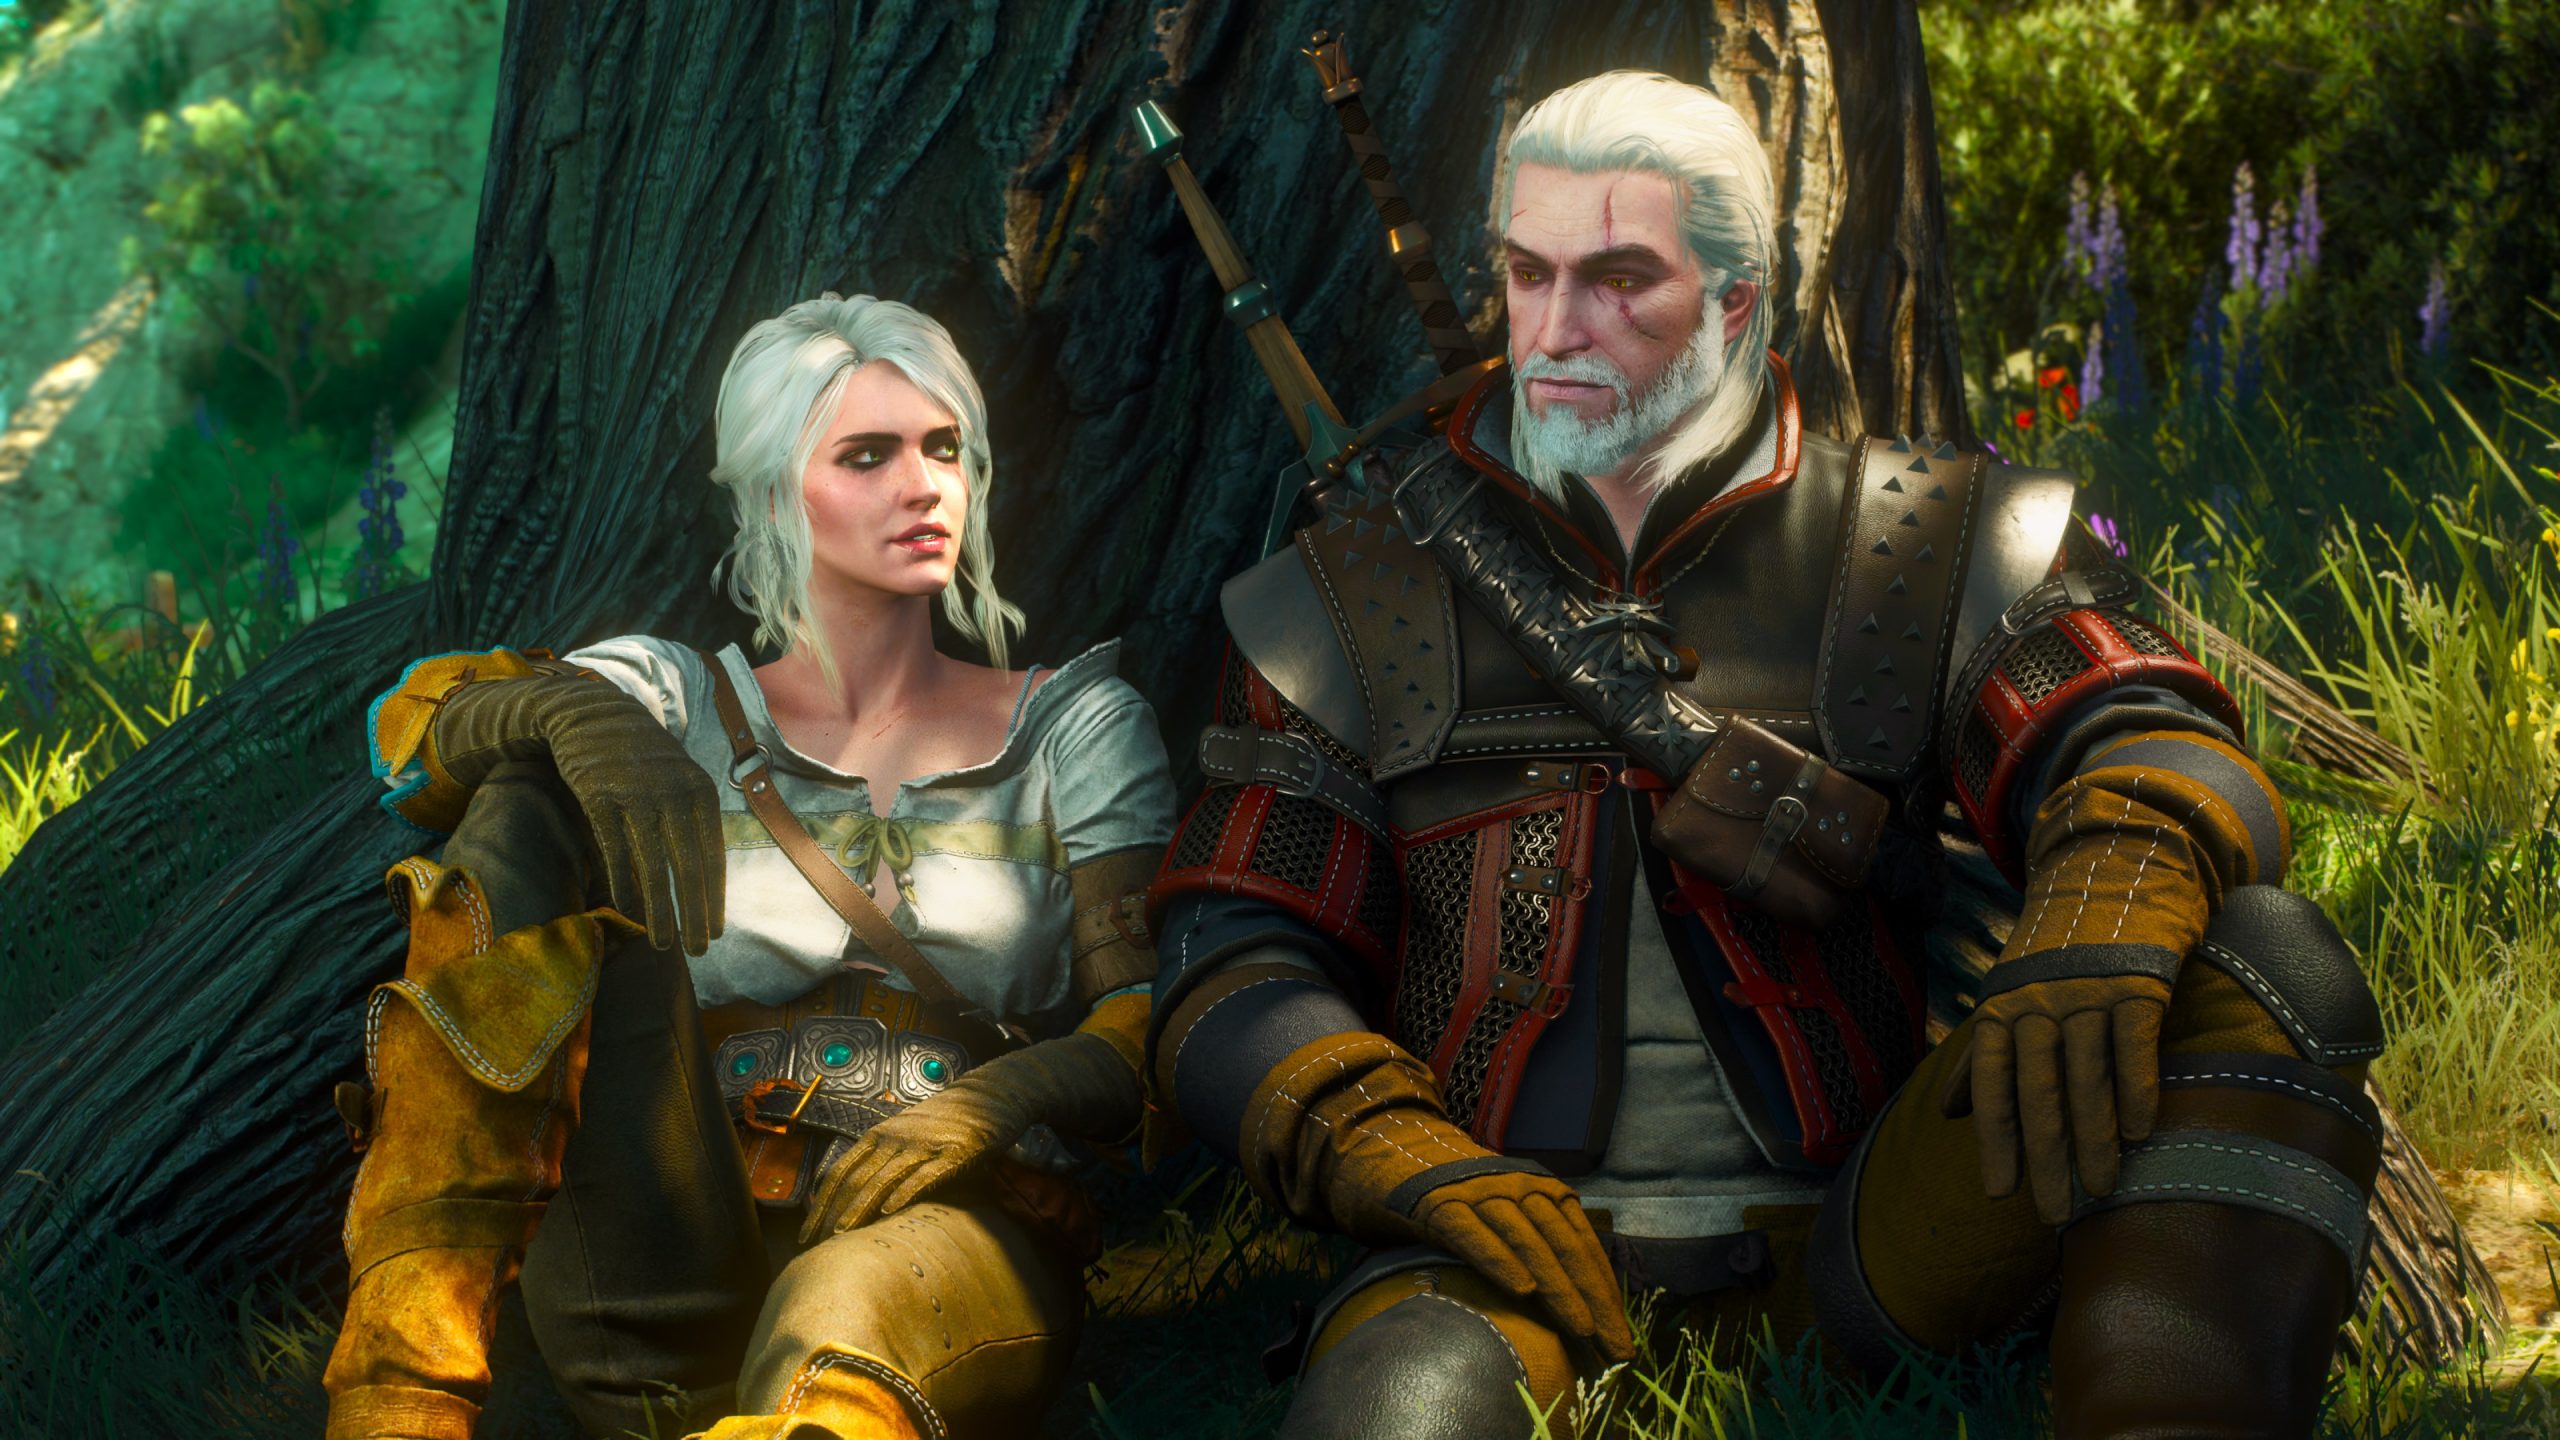 The Witcher 2: Assassins of Kings - Metacritic